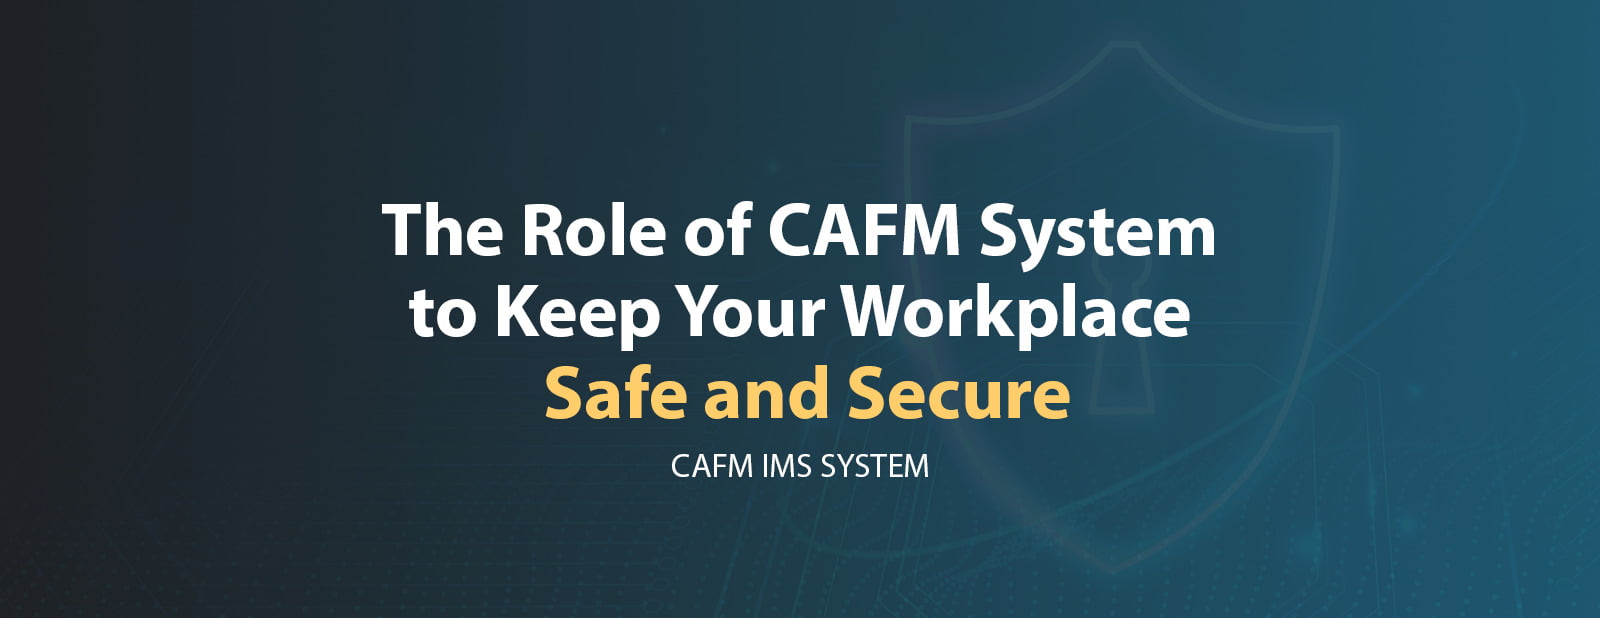 The Role of CAFM System to Keep Your Workplace Safe and Secure